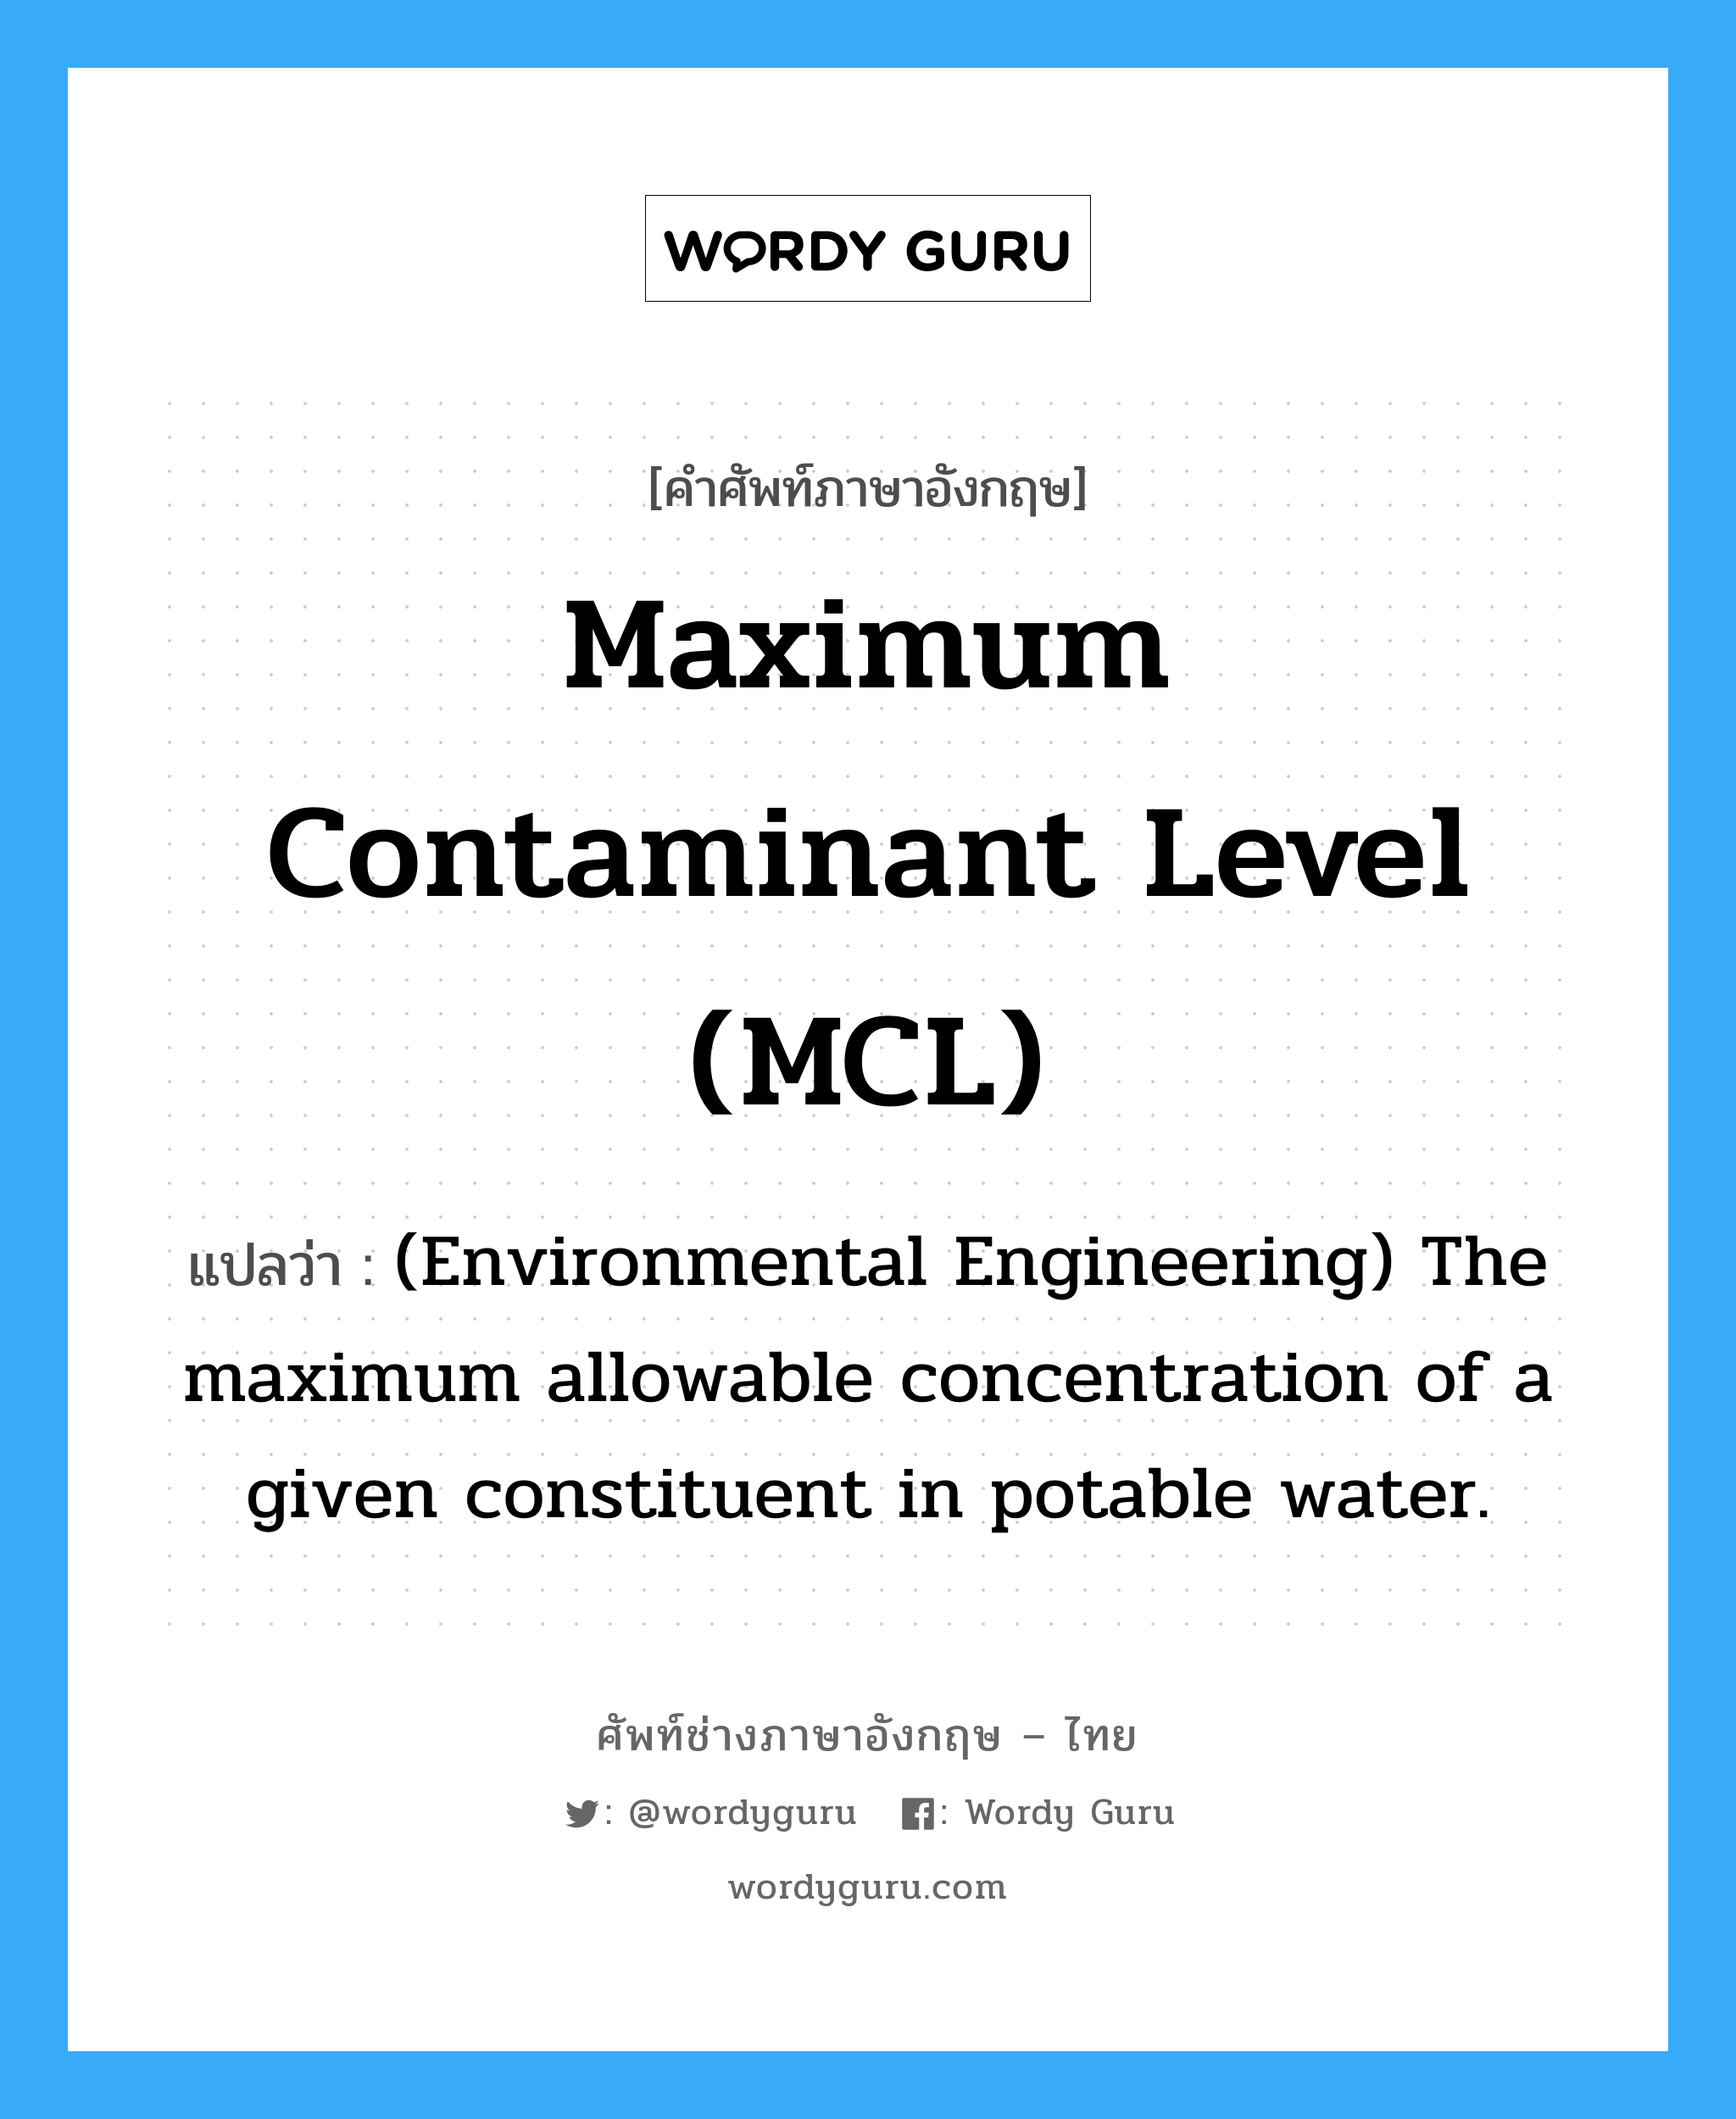 Maximum contaminant level (MCL) แปลว่า?, คำศัพท์ช่างภาษาอังกฤษ - ไทย Maximum contaminant level (MCL) คำศัพท์ภาษาอังกฤษ Maximum contaminant level (MCL) แปลว่า (Environmental Engineering) The maximum allowable concentration of a given constituent in potable water.